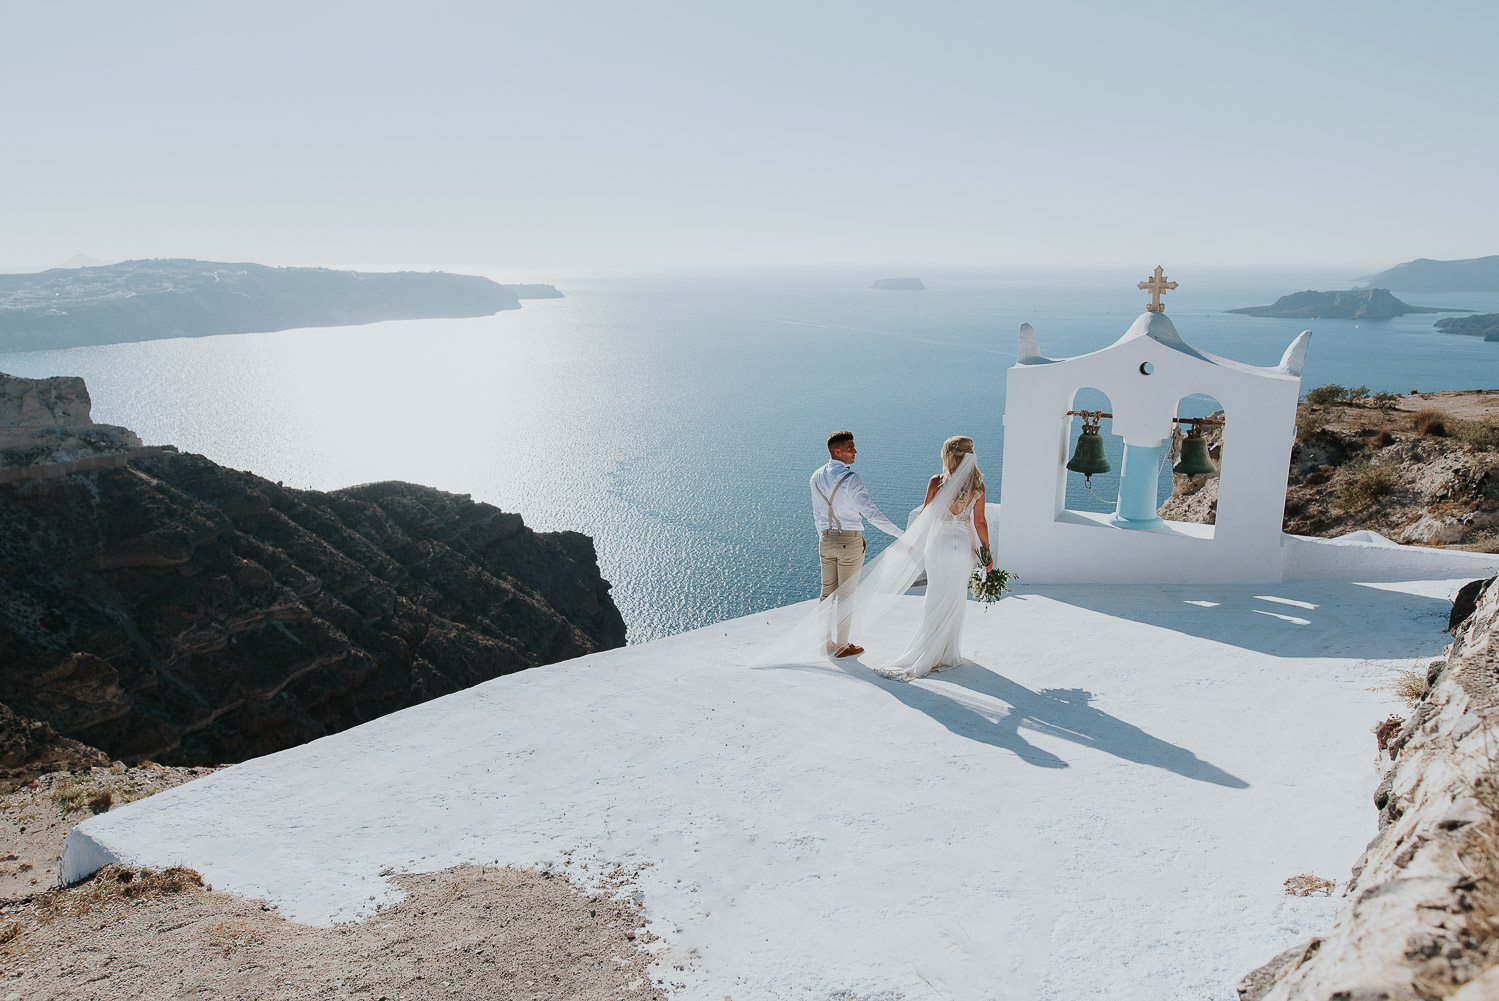 Wedding photographer Santorini: panoramic photo of bride and groom holding hands with bell tower, sea and the sky around them by Ben and Vesna.